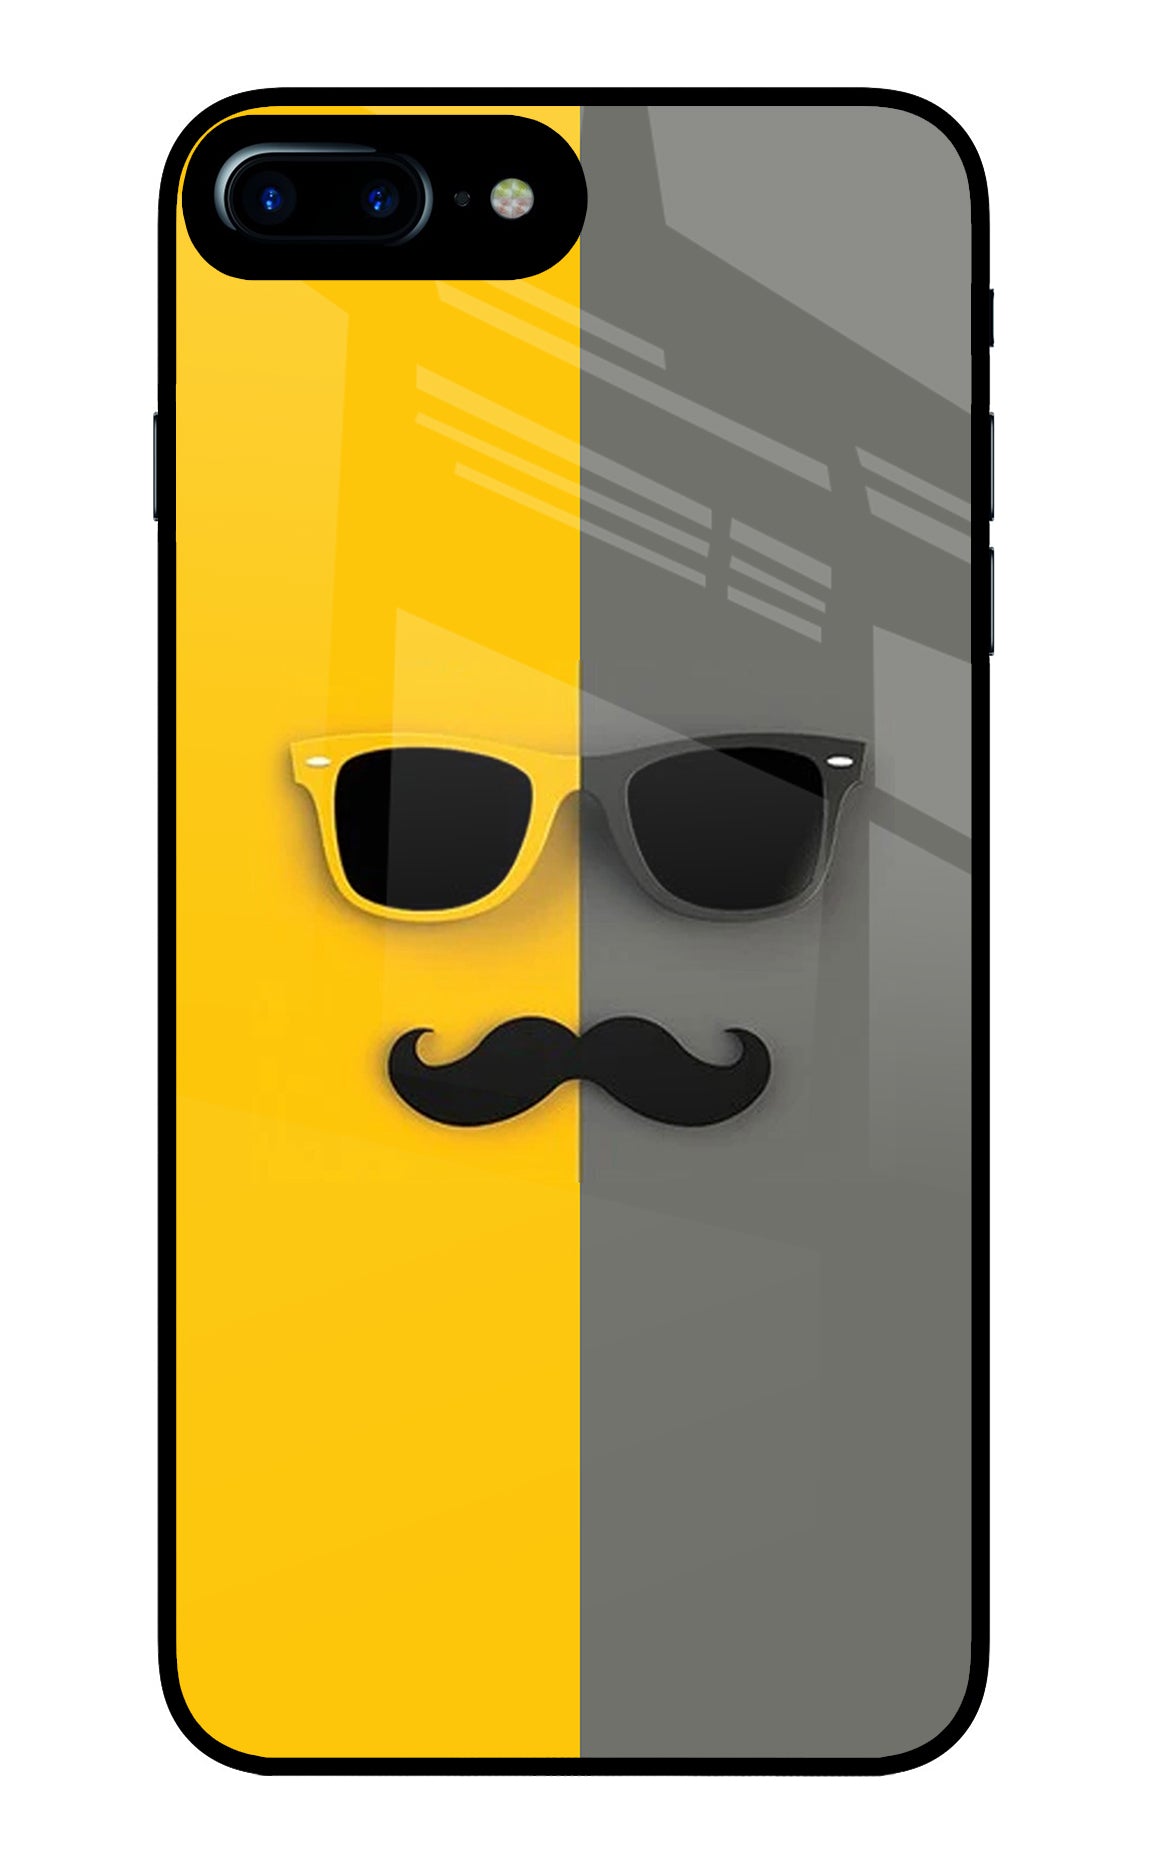 Sunglasses with Mustache iPhone 7 Plus Glass Case